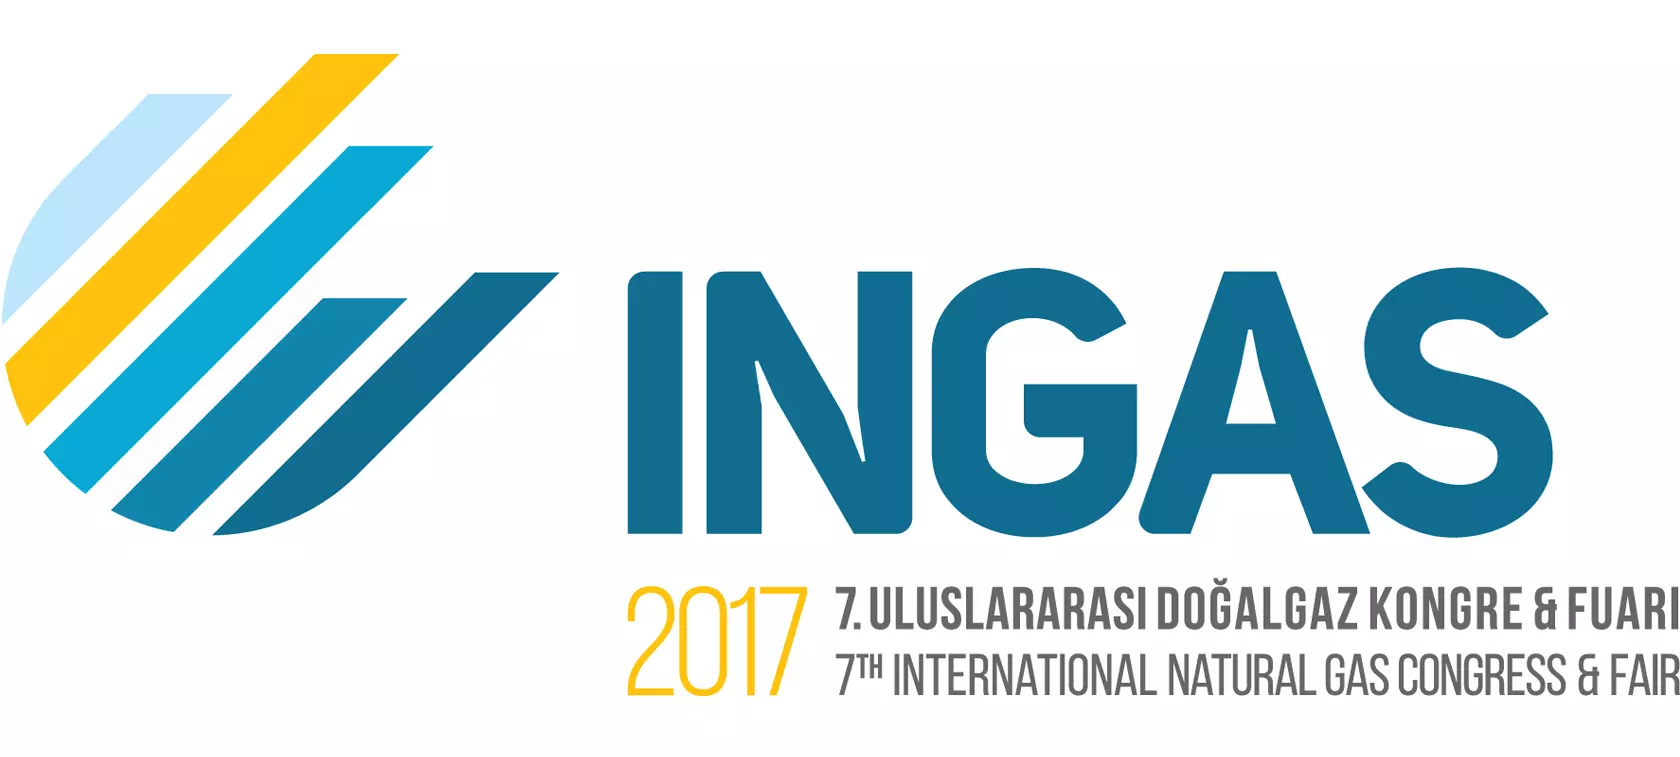 Natural gas leaders coming to INGAS 2017